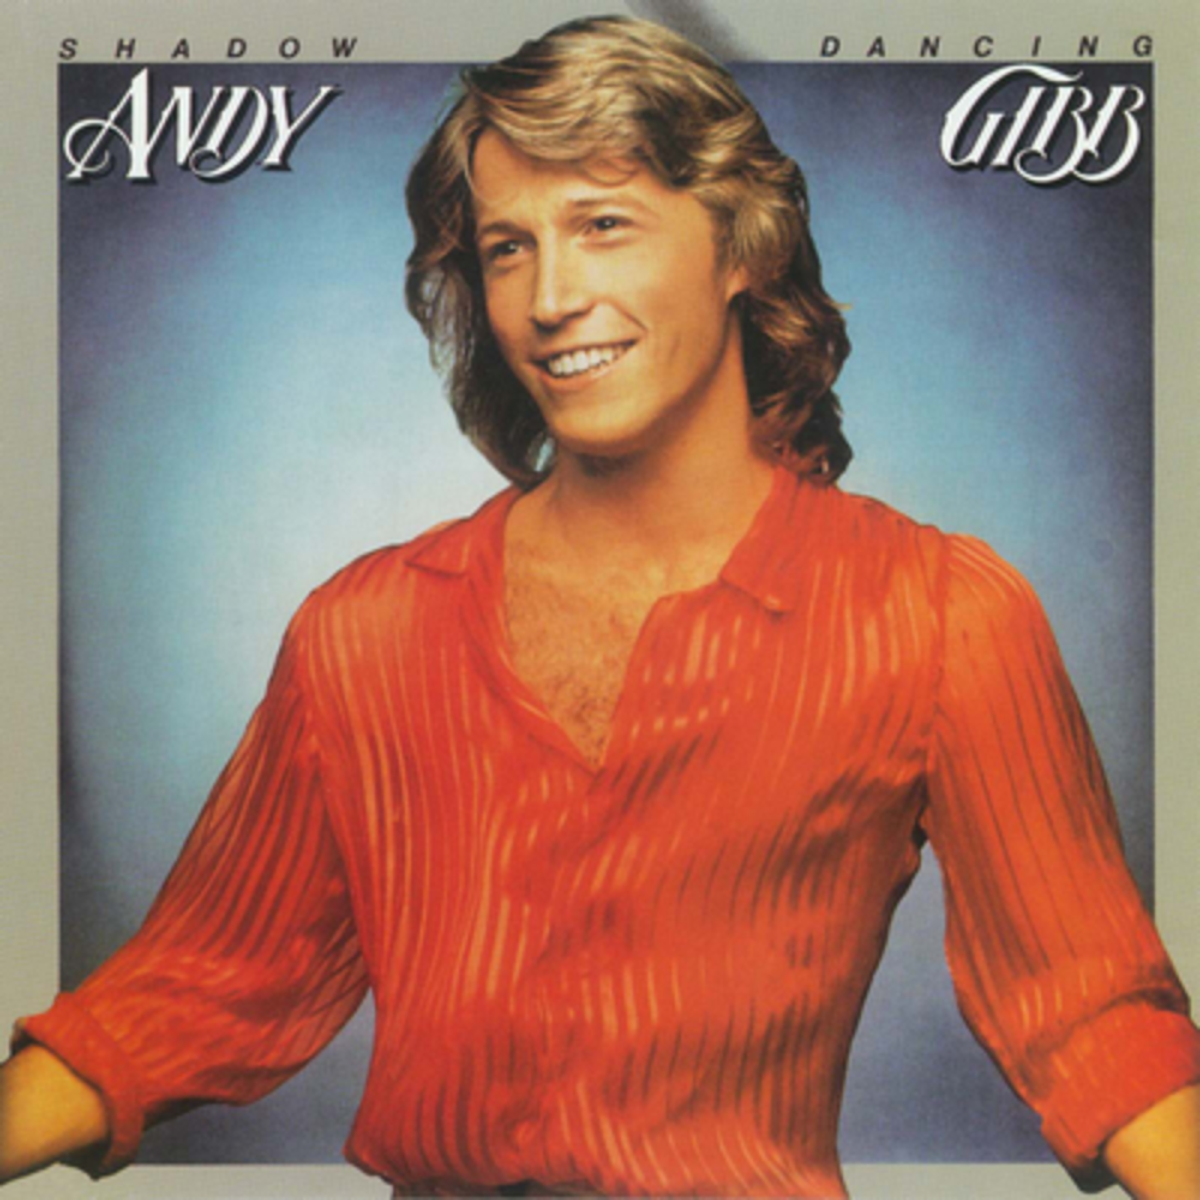 Andy Gibb "Shadow Dancing" album cover